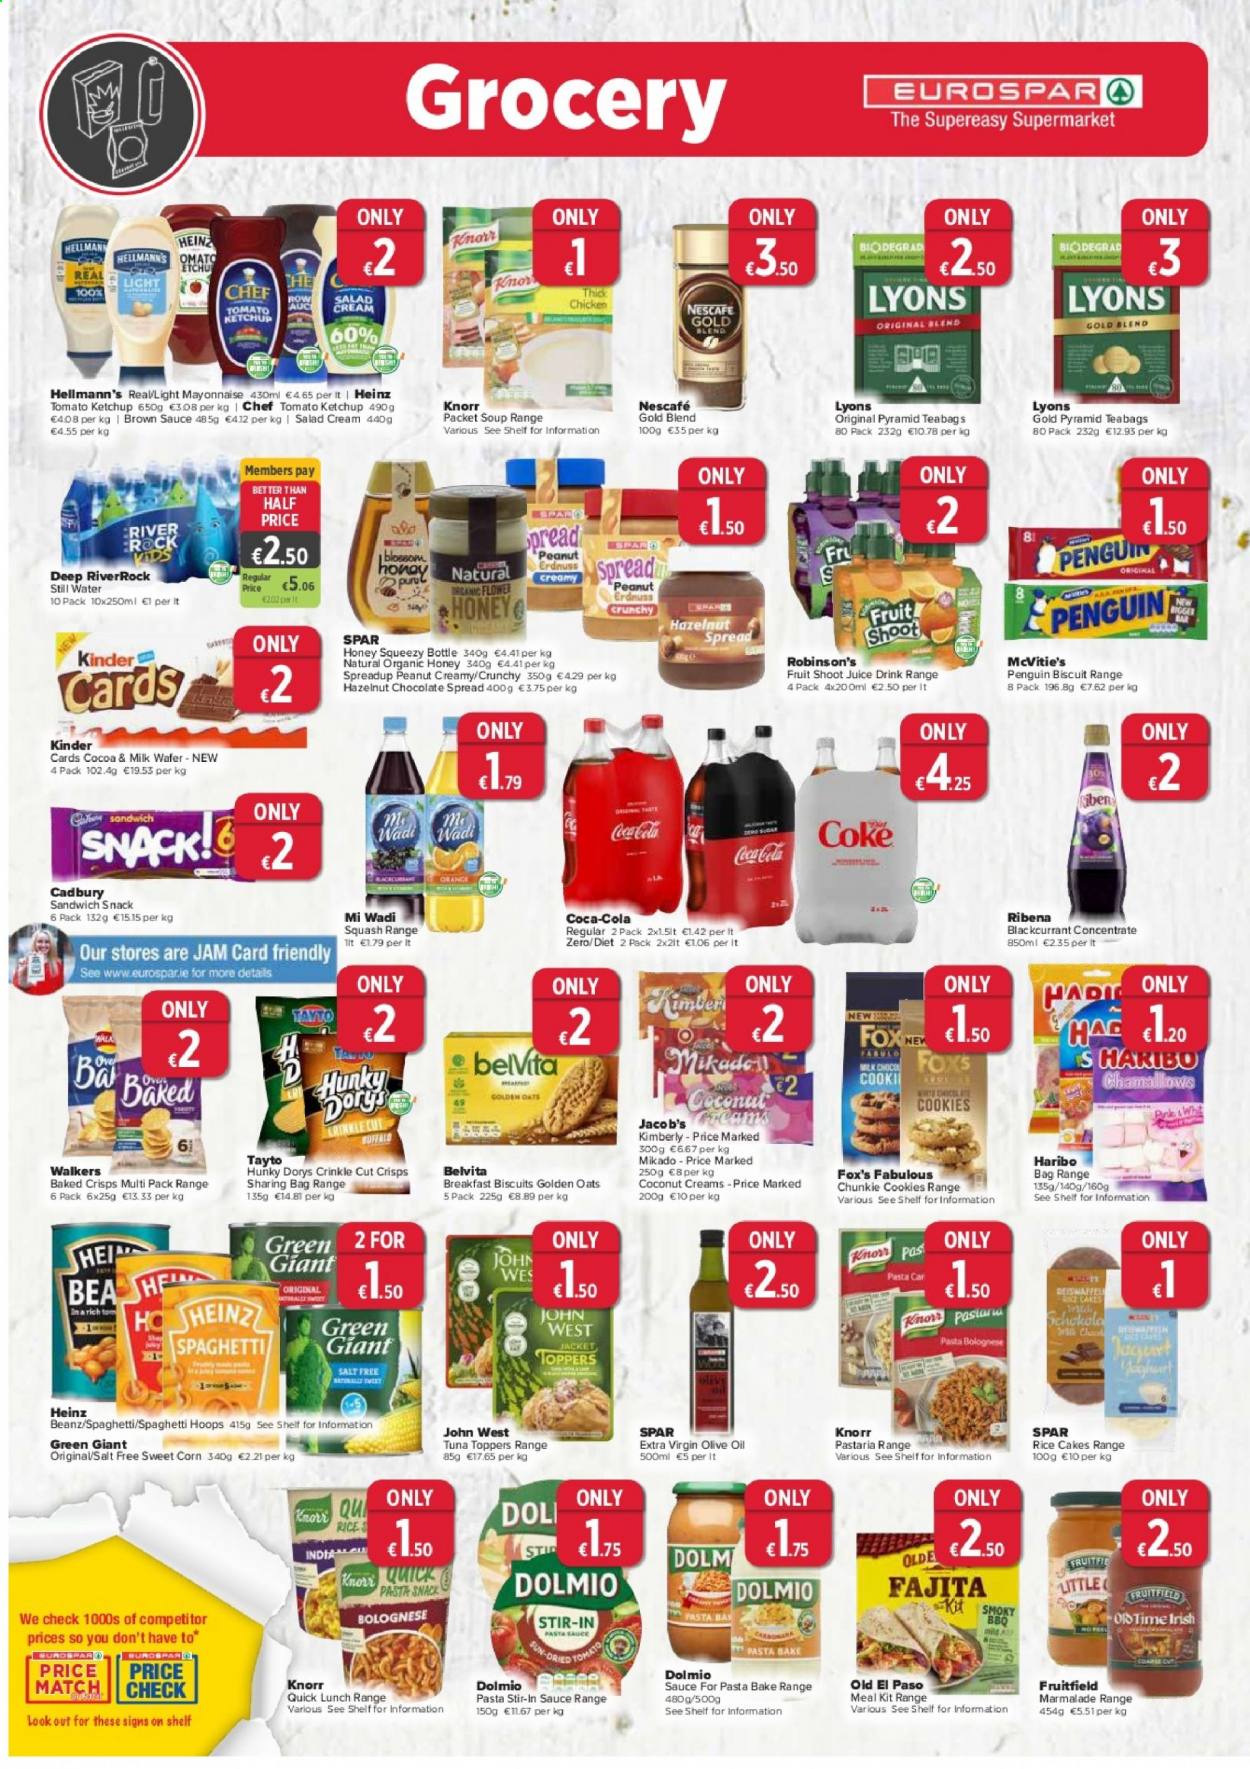 EUROSPAR offer  - 19.8.2021 - 8.9.2021 - Sales products - Old El Paso, corn, sweet corn, coconut, tuna, spaghetti, pasta sauce, soup, Knorr, Blossom, mayonnaise, salad cream, Hellmann’s, cookies, wafers, snack, Haribo, biscuit, Cadbury, TAYTO, oats, Heinz, belVita, rice, ketchup, brown sauce, extra virgin olive oil, olive oil, oil, honey, jam, hazelnut spread, Coca-Cola, juice, mineral water, bottled water, tea bags, Lyons, Nescafé. Page 6.